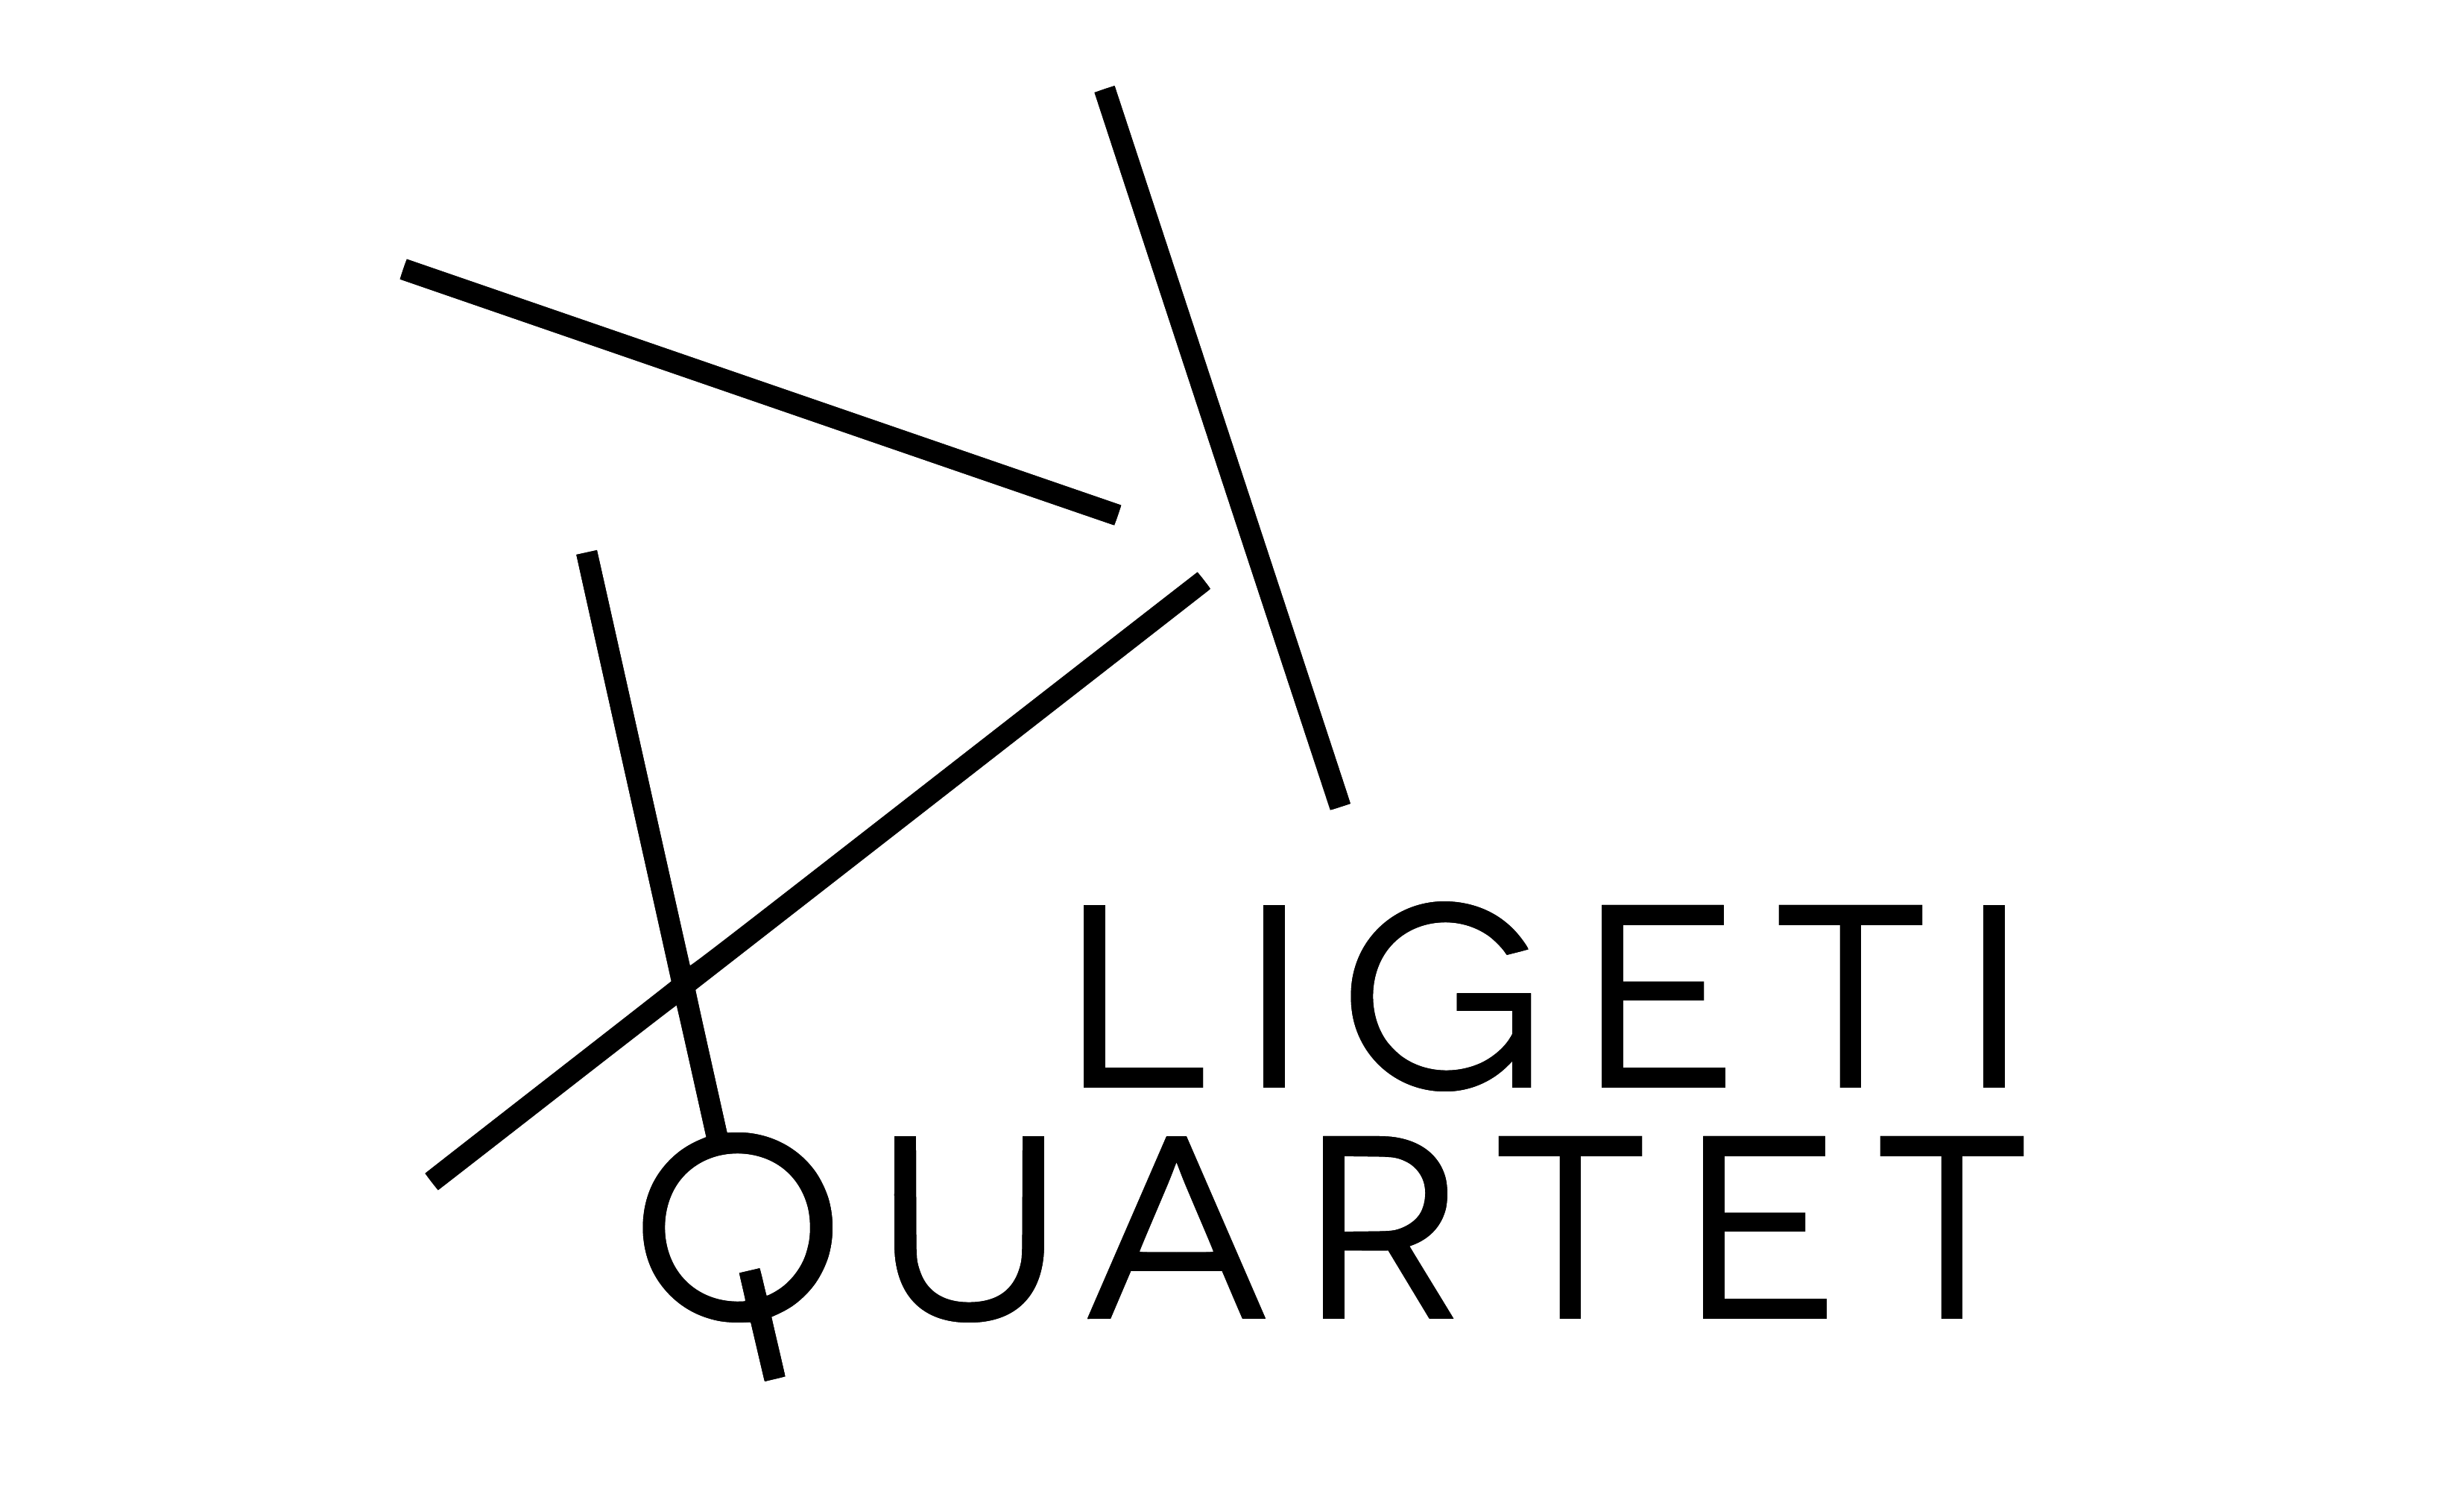 Ligeti Quartet logo (text with four intersecting lines in pattern top left)